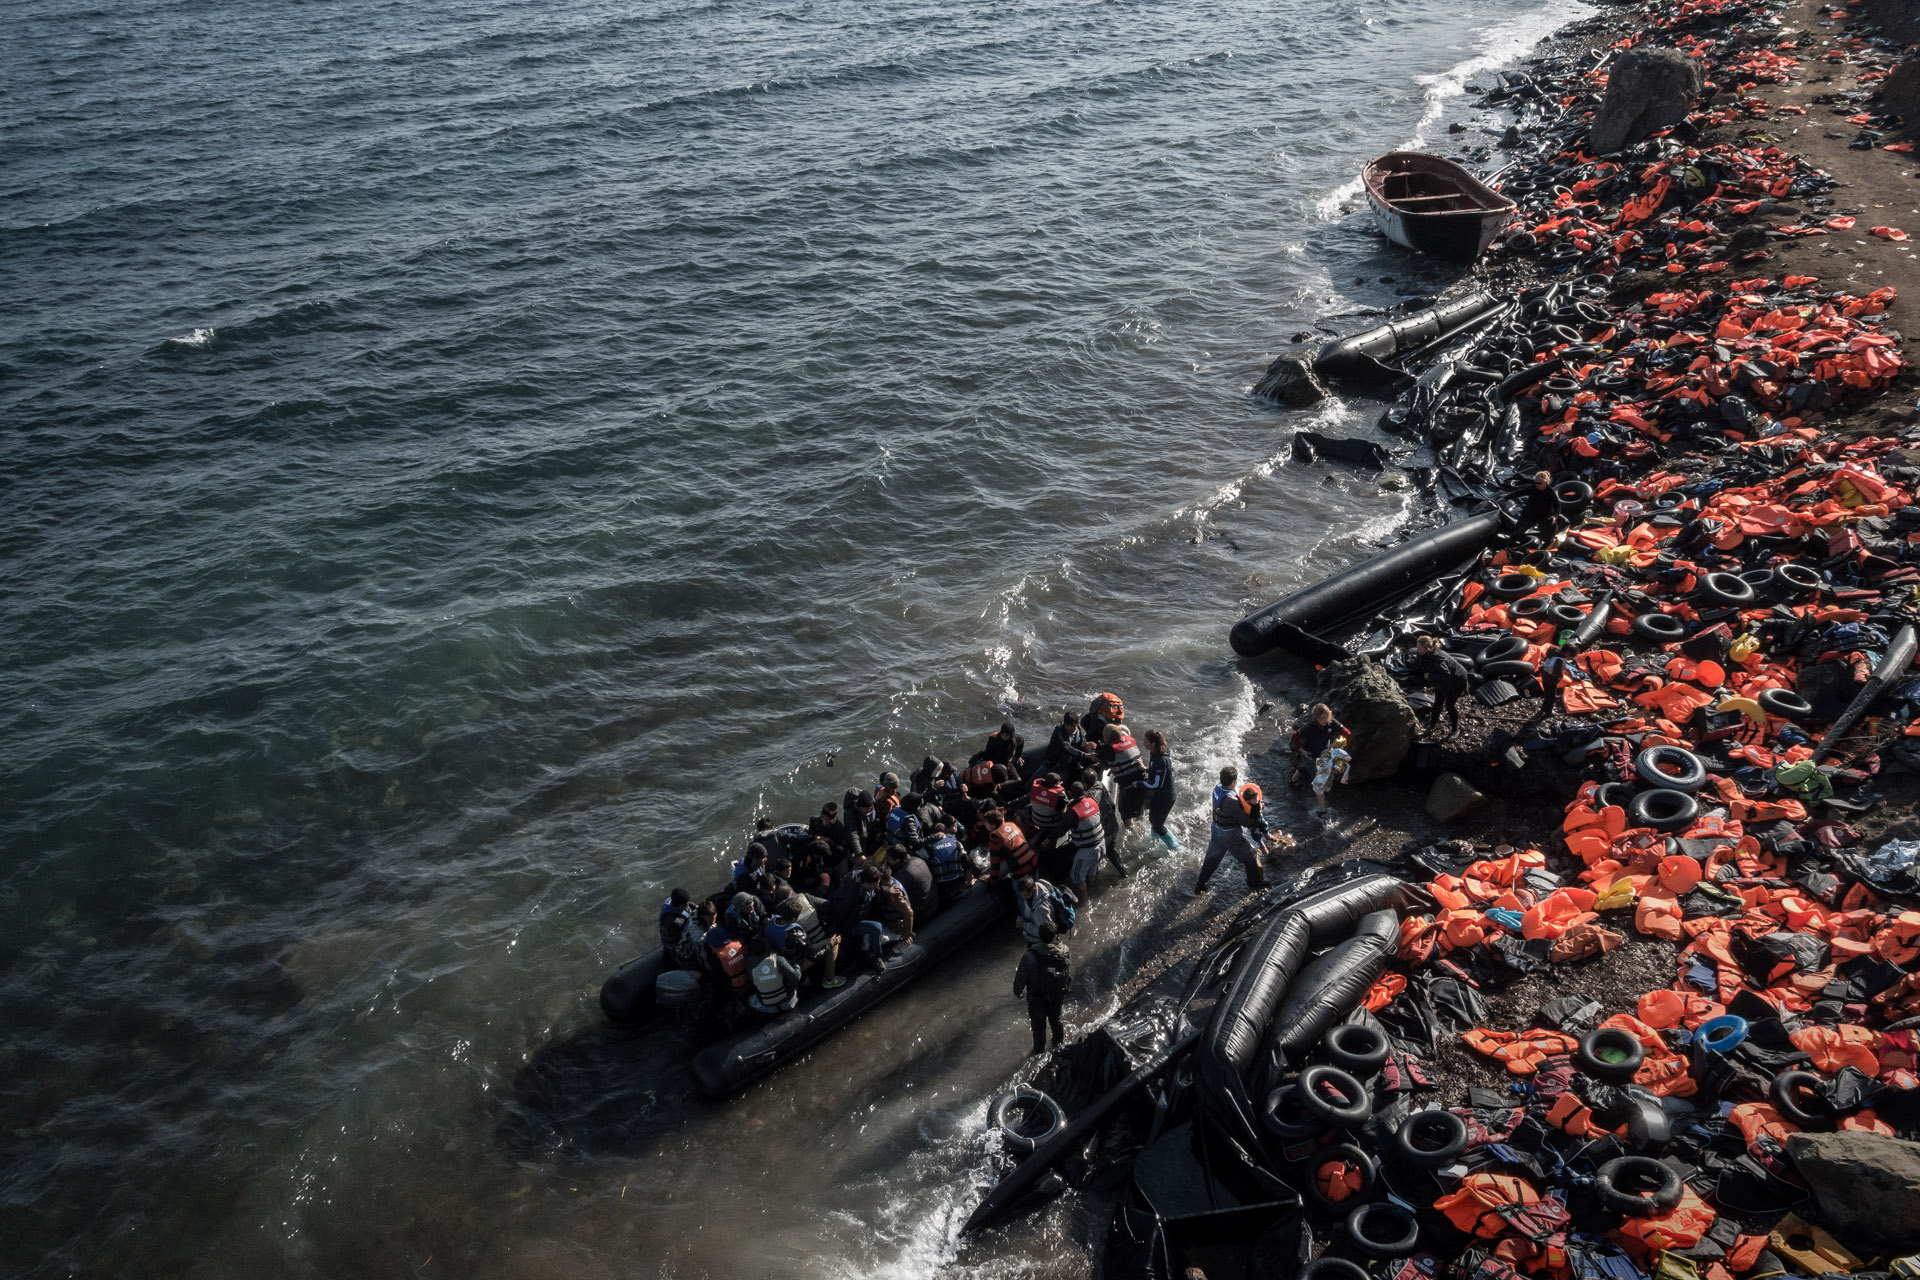 Refugees and migrants arrive on the shore in Greece.